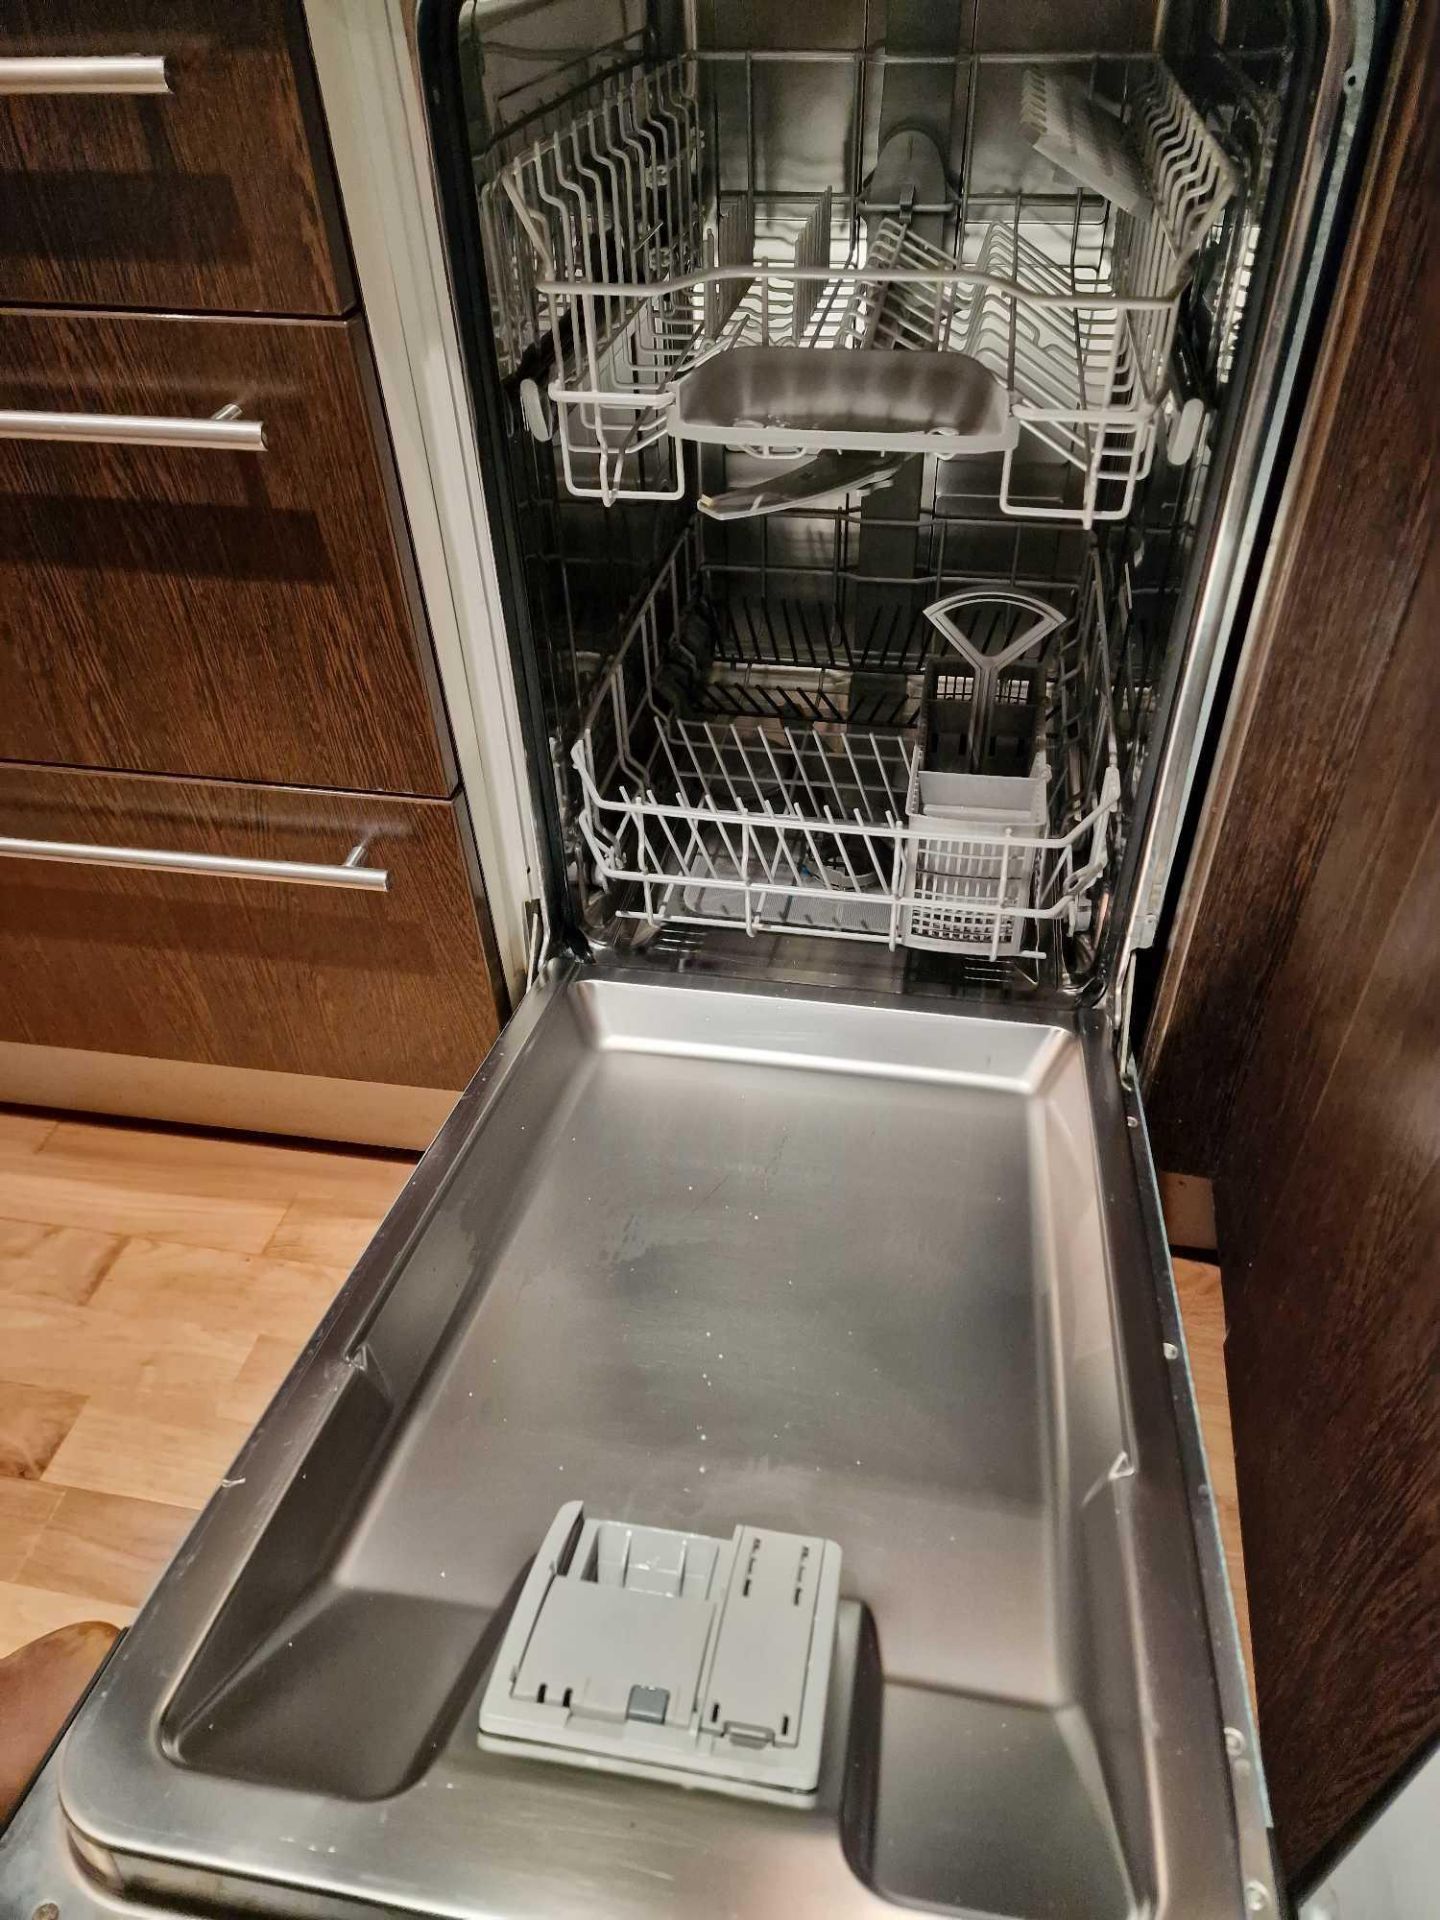 Siemens SD4P1S 10.0 Place settings integrated dishwasher 40 x 60 x 90cm (Room 1B) - Image 2 of 2